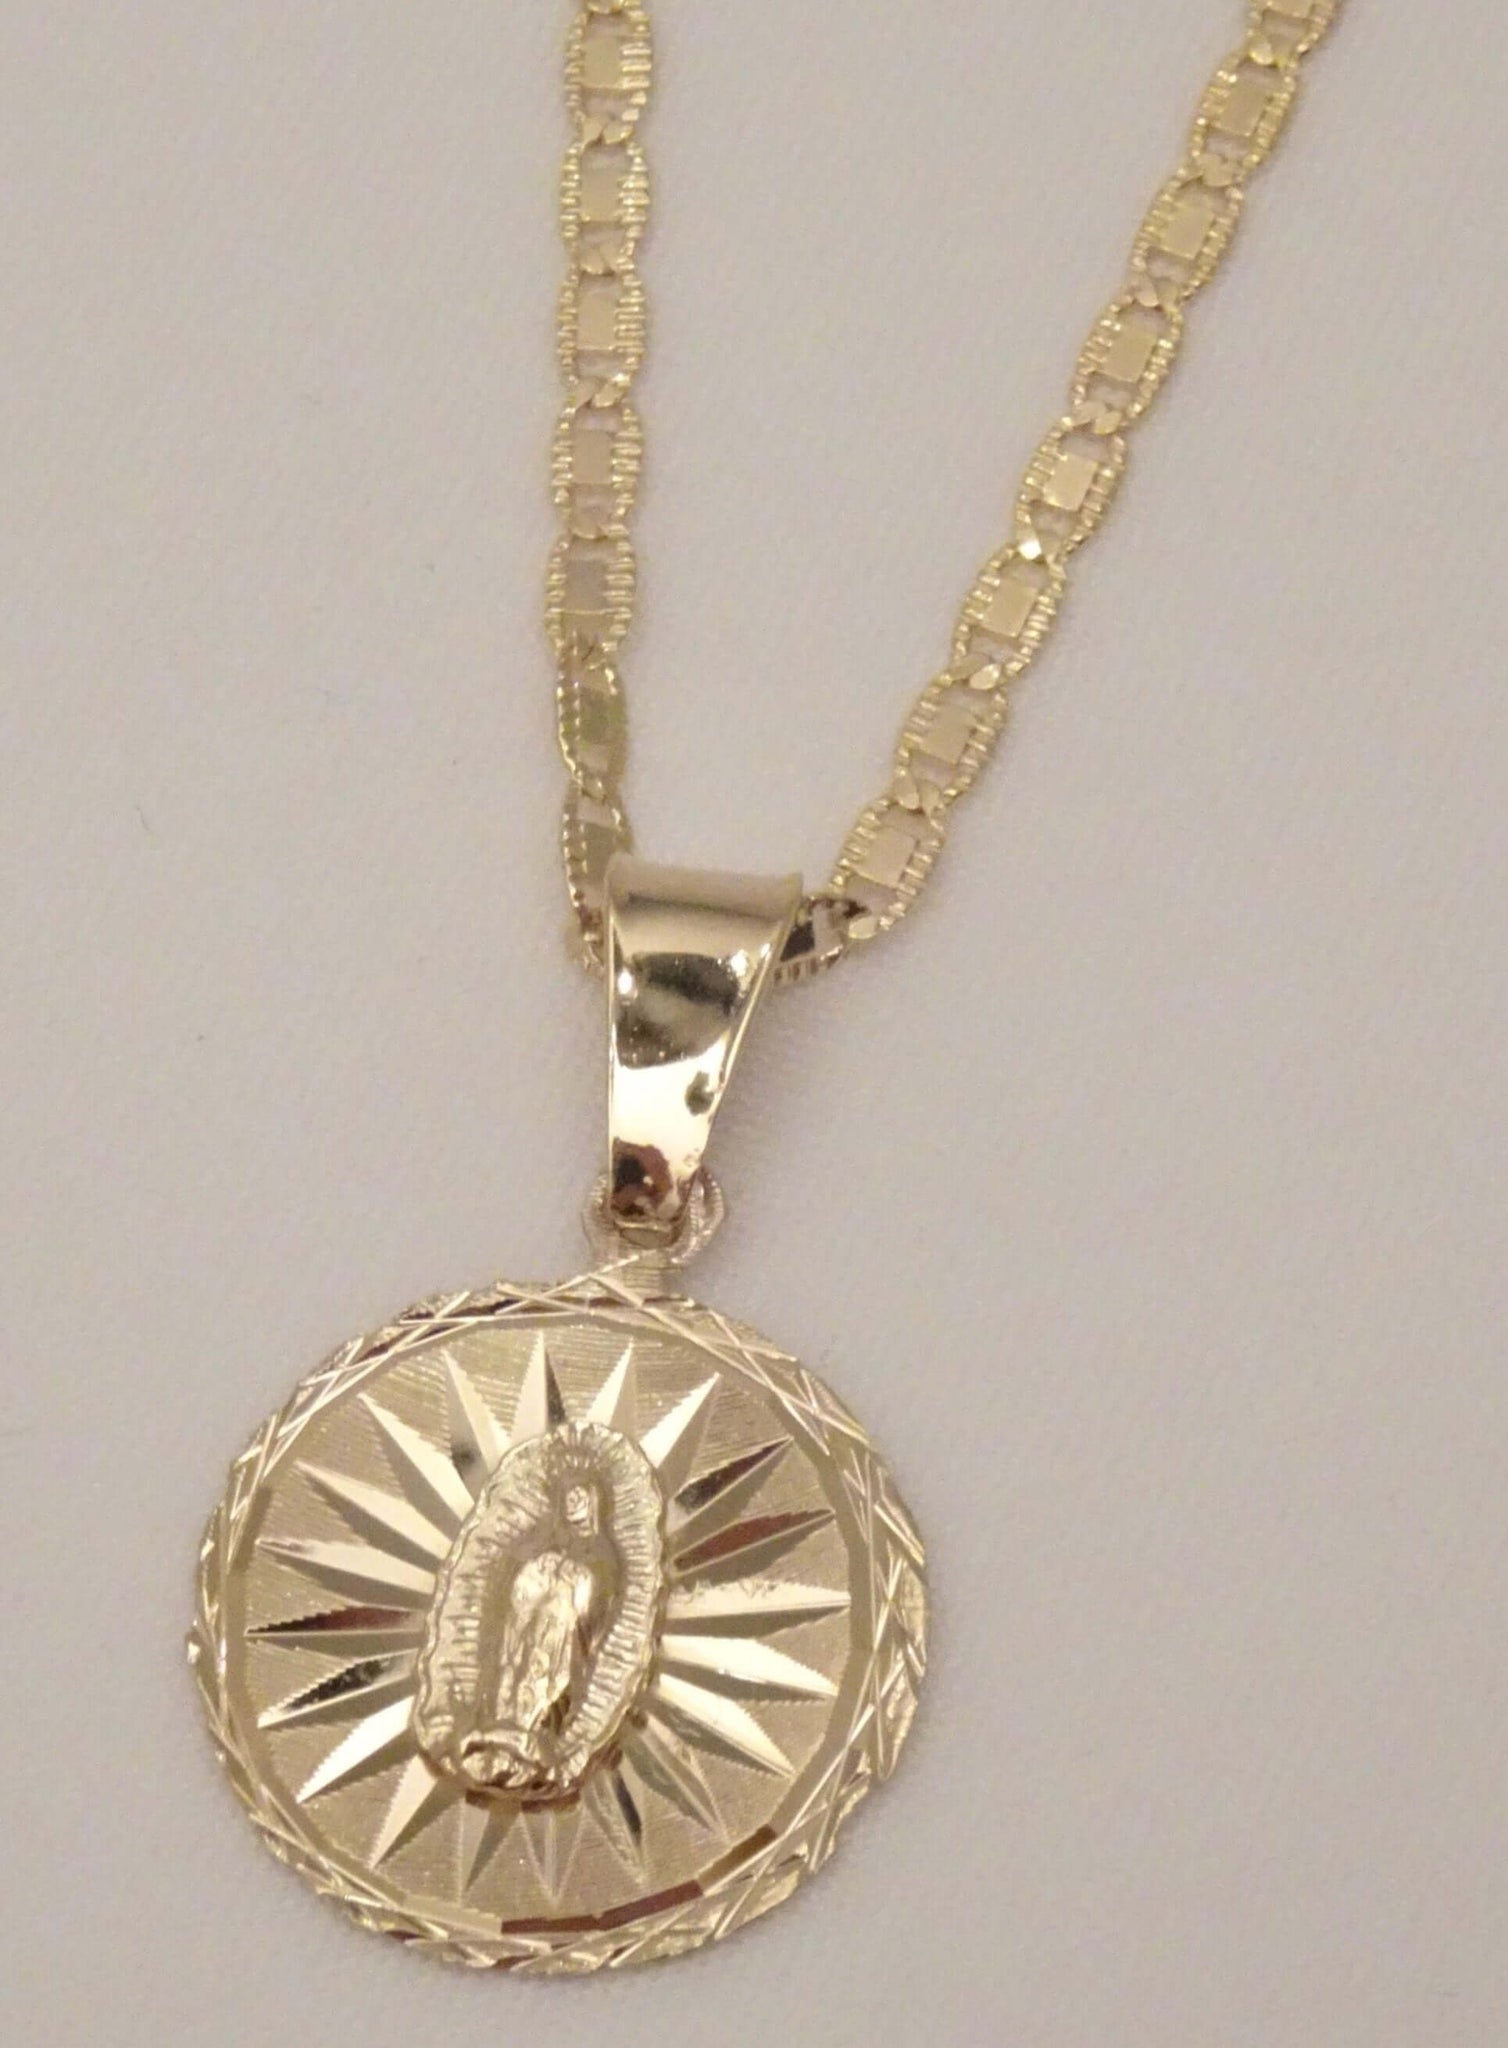 Kids Collection 14K Yellow Gold Virgin Mary Medal Necklace - Walmart.com